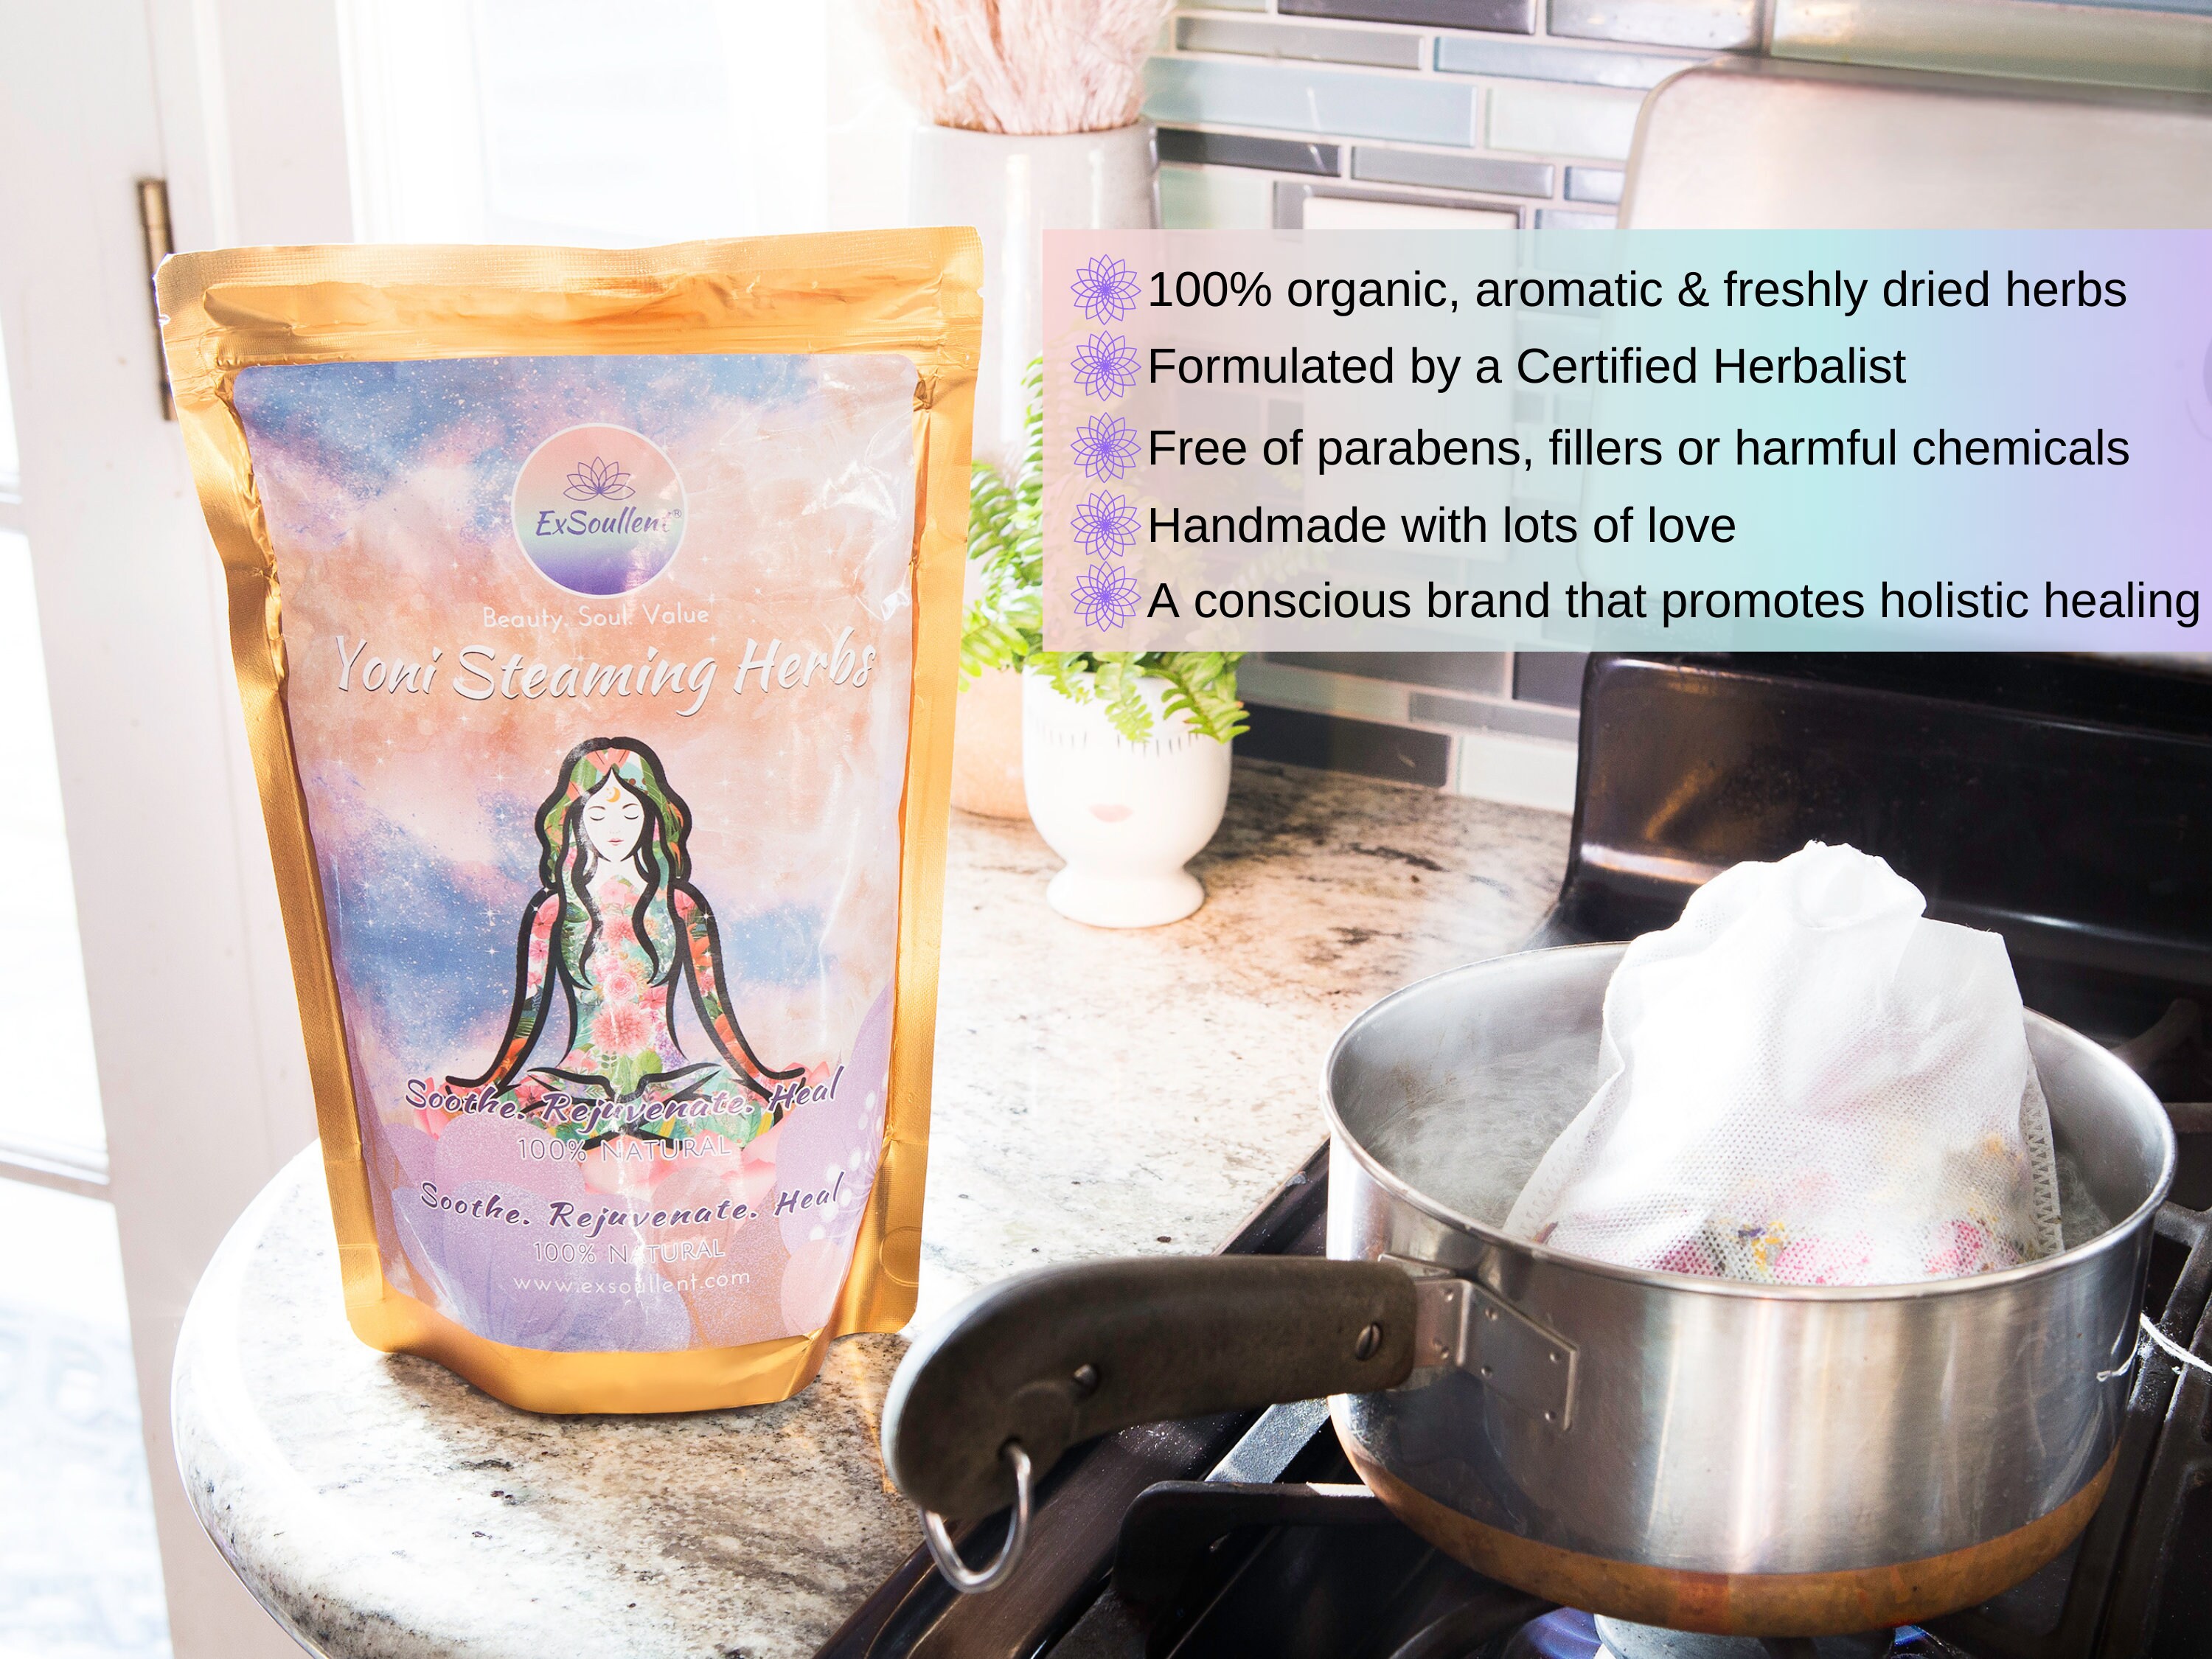 YONI STEAM Organic Vaginal Steaming Herbs Blend for Womb photo